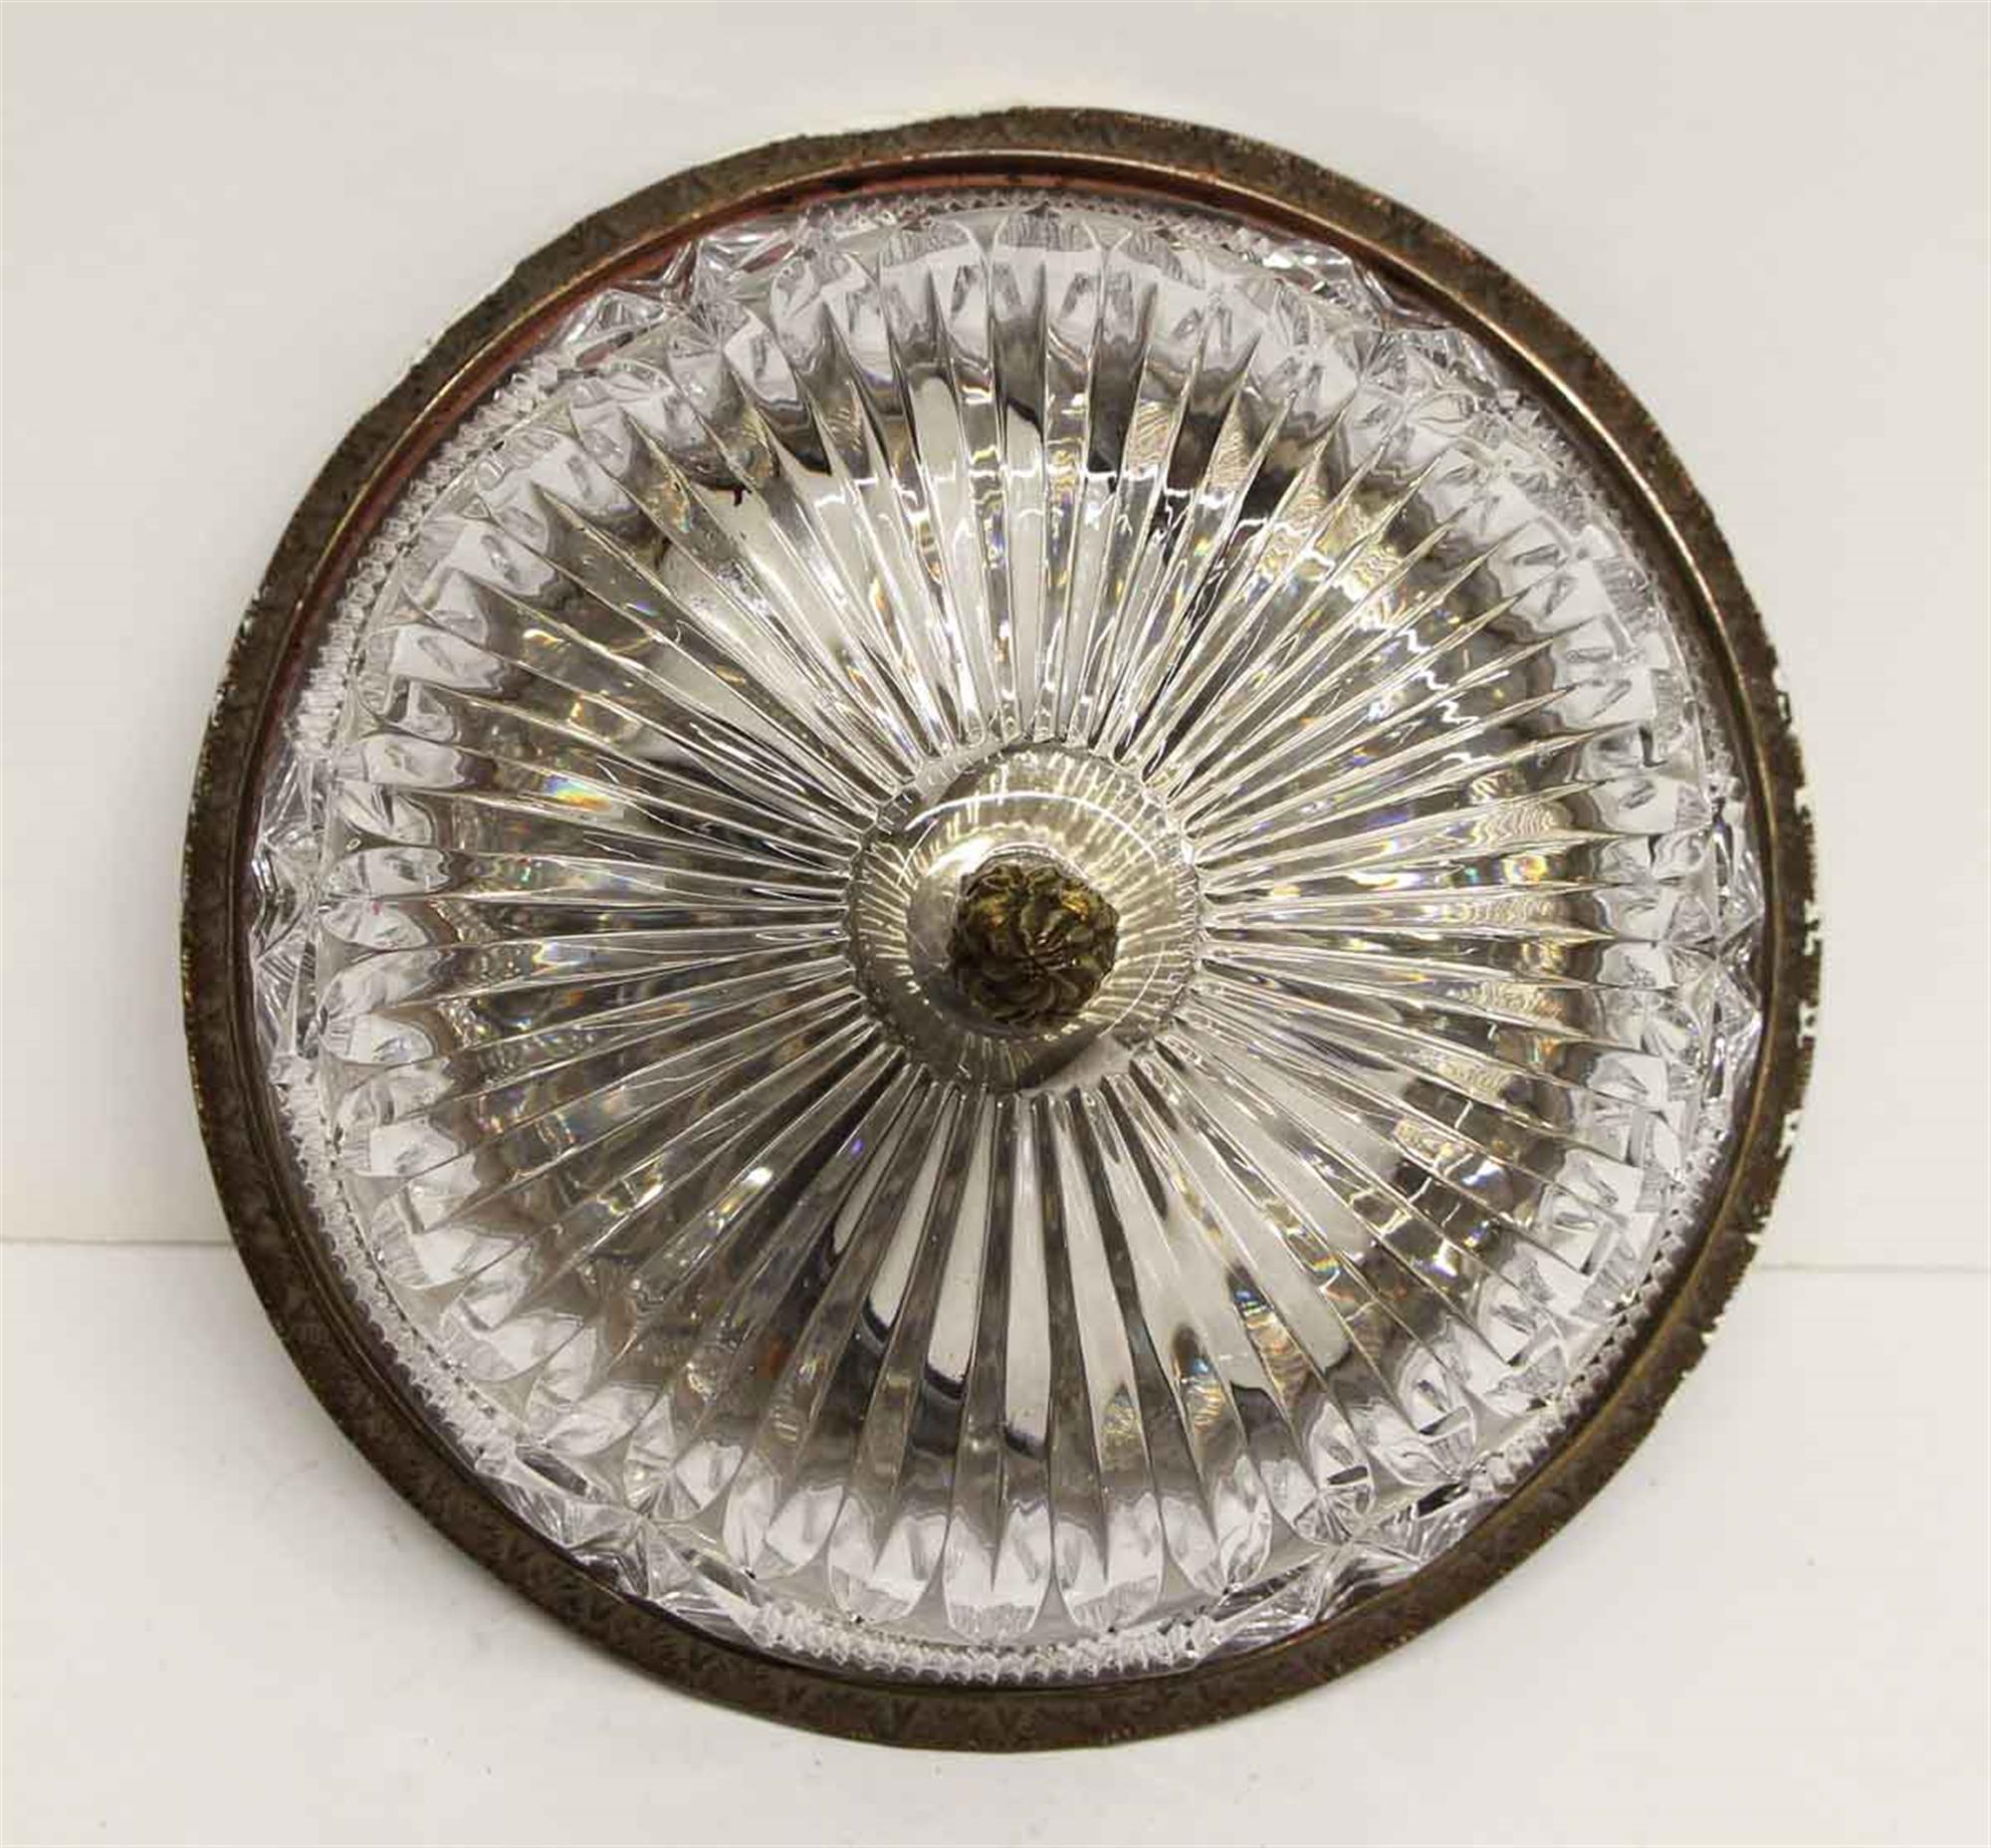 1940s heavy cut crystal flush mount fixture with a cast brass or bronze ornate rim and finial. From the NYC Waldorf Astoria Hotel. Price includes wiring and cleaning. A Waldorf Astoria authenticity card included with your purchase. This can be seen